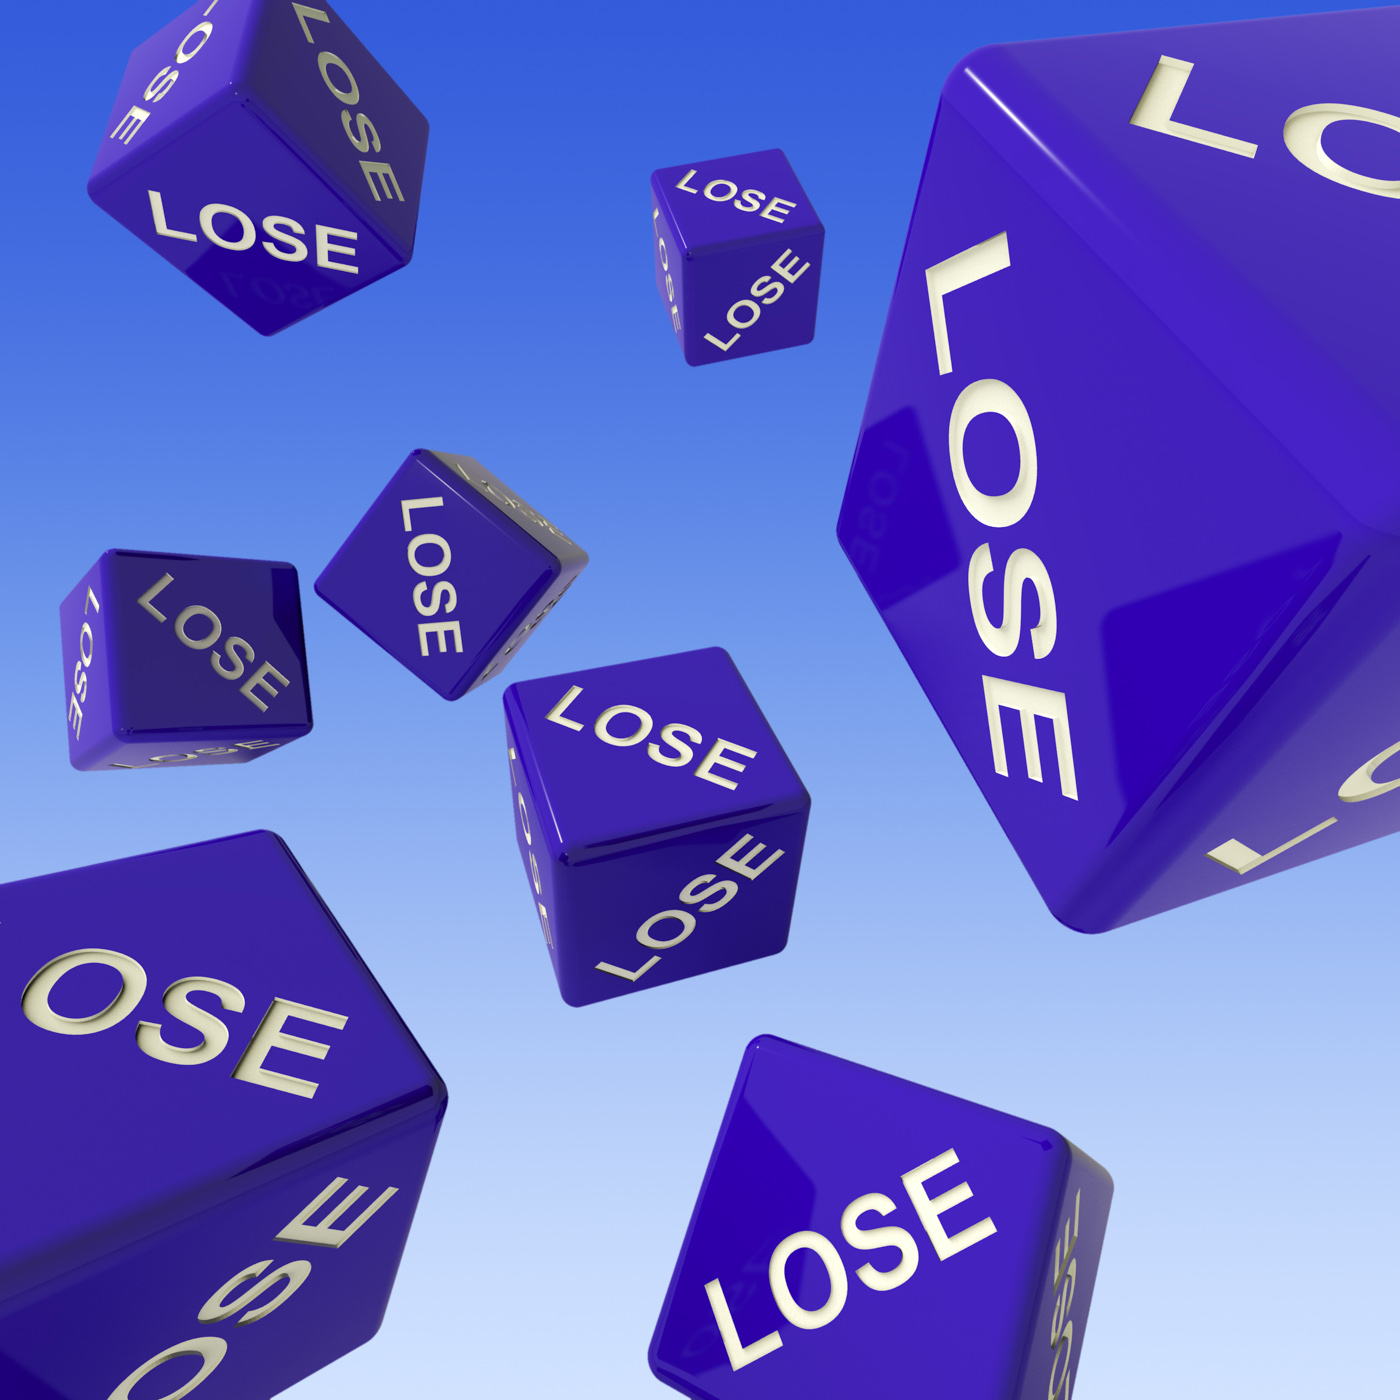 Lose dice background showing failure photo